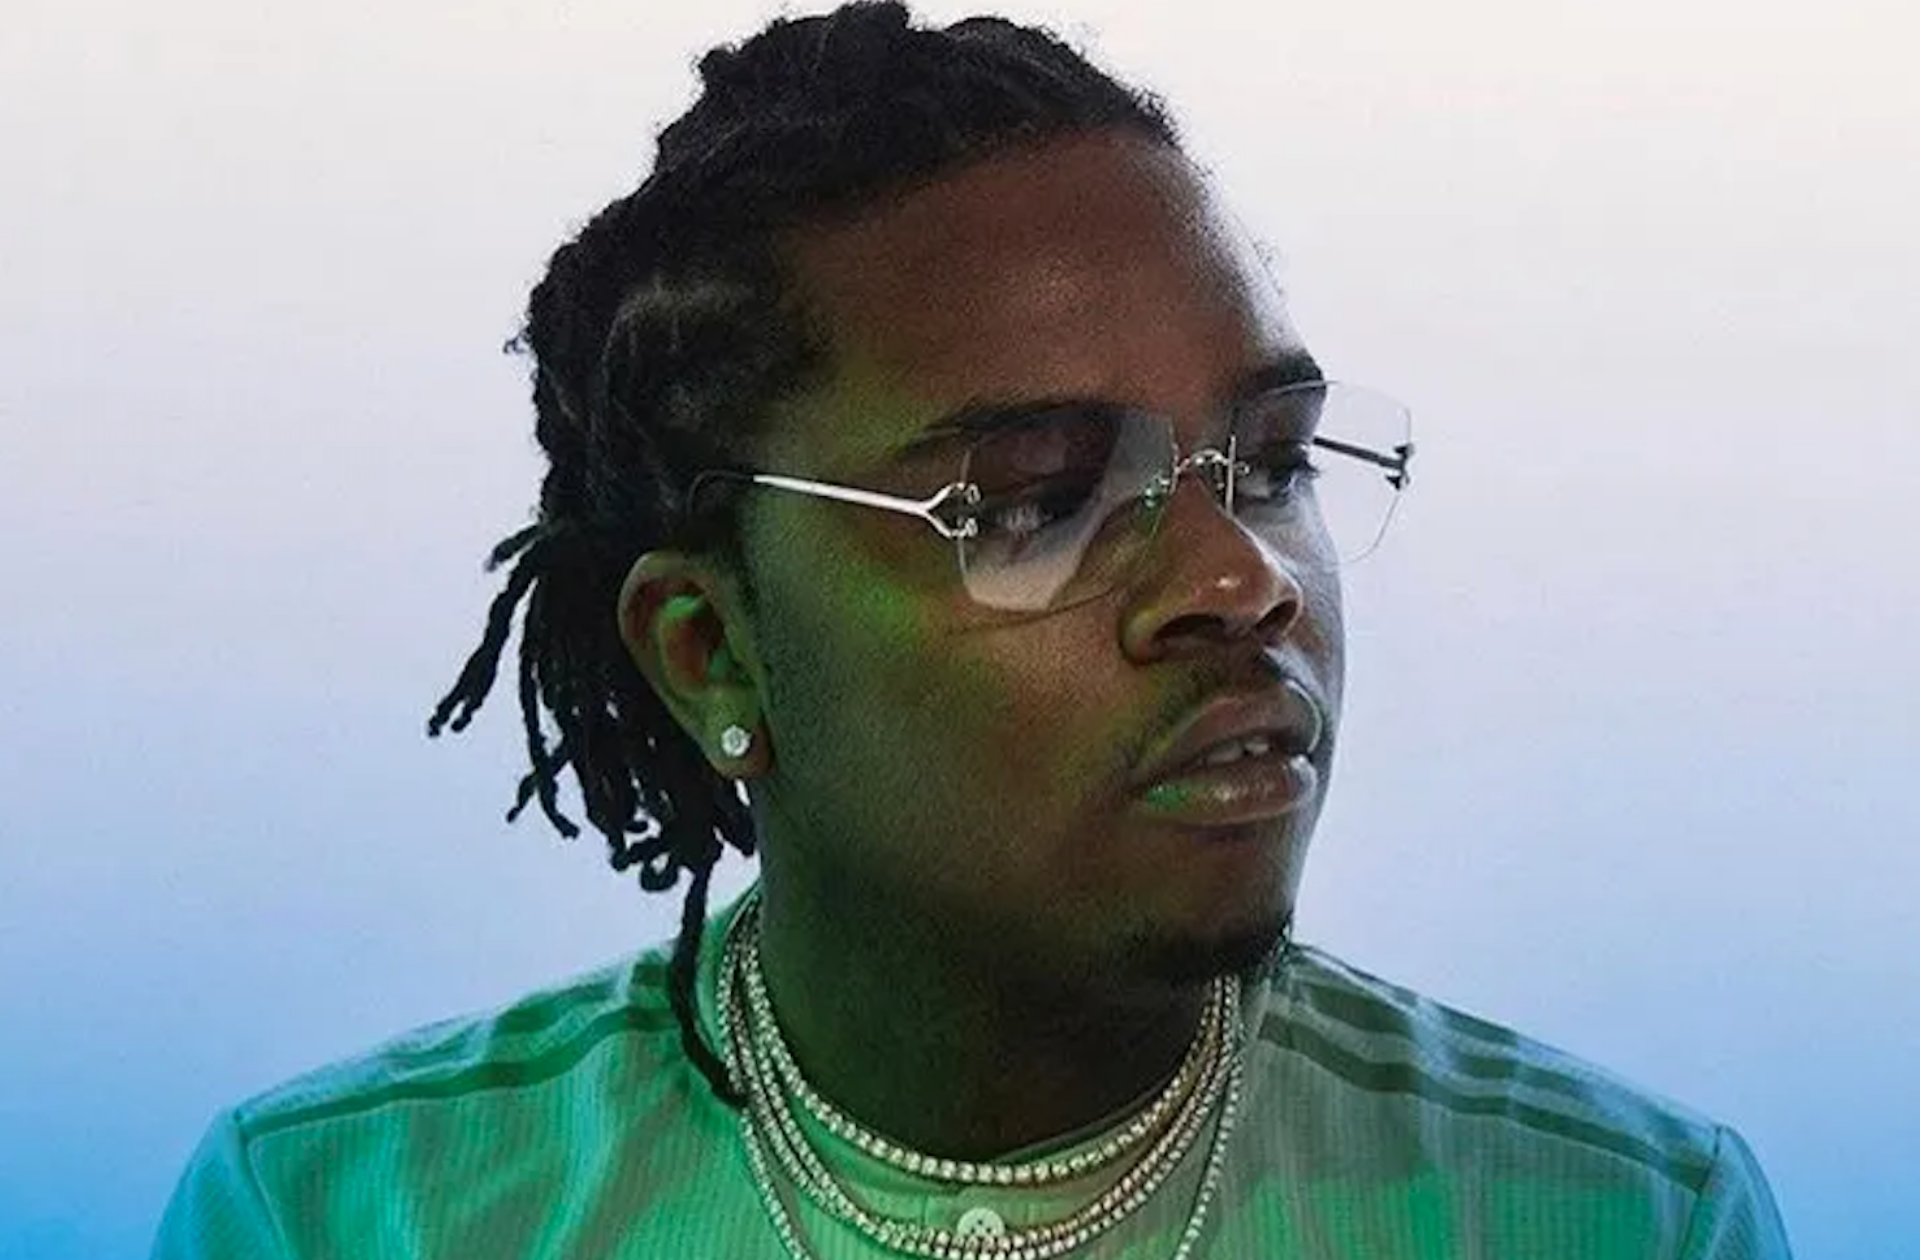 Gunna returns with a bang, ensuring the summer kicks off with eager anticipation for his upcoming hits.